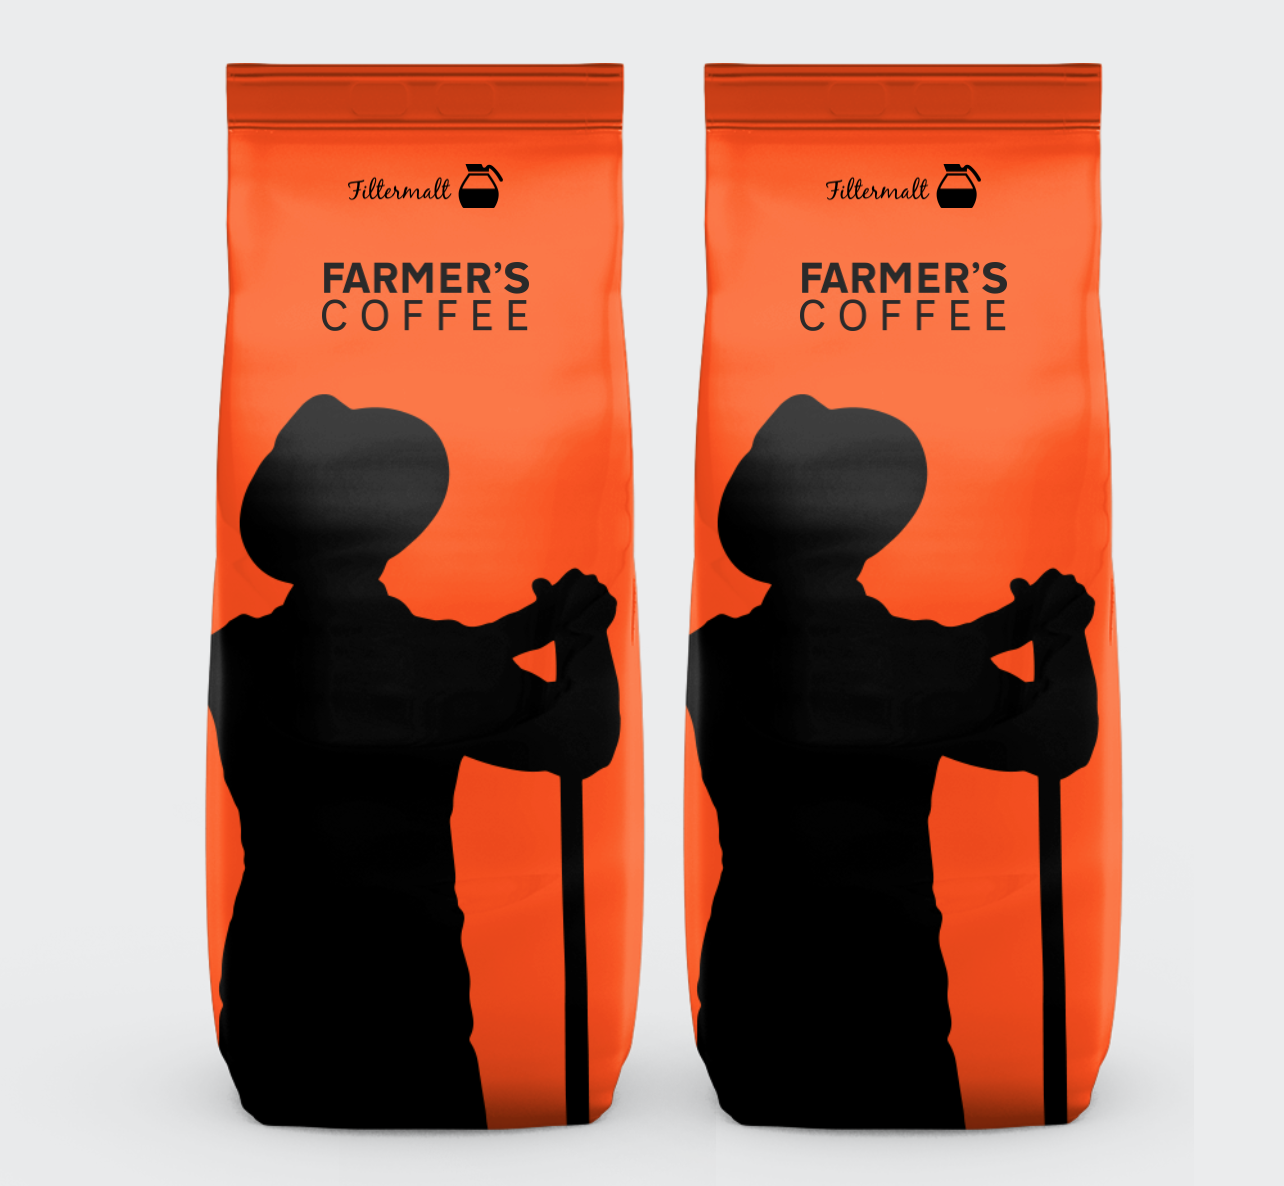  Redesign of Farmer's Coffee, by Joh. Johannson. Work done with Tangram (part of Bates). 